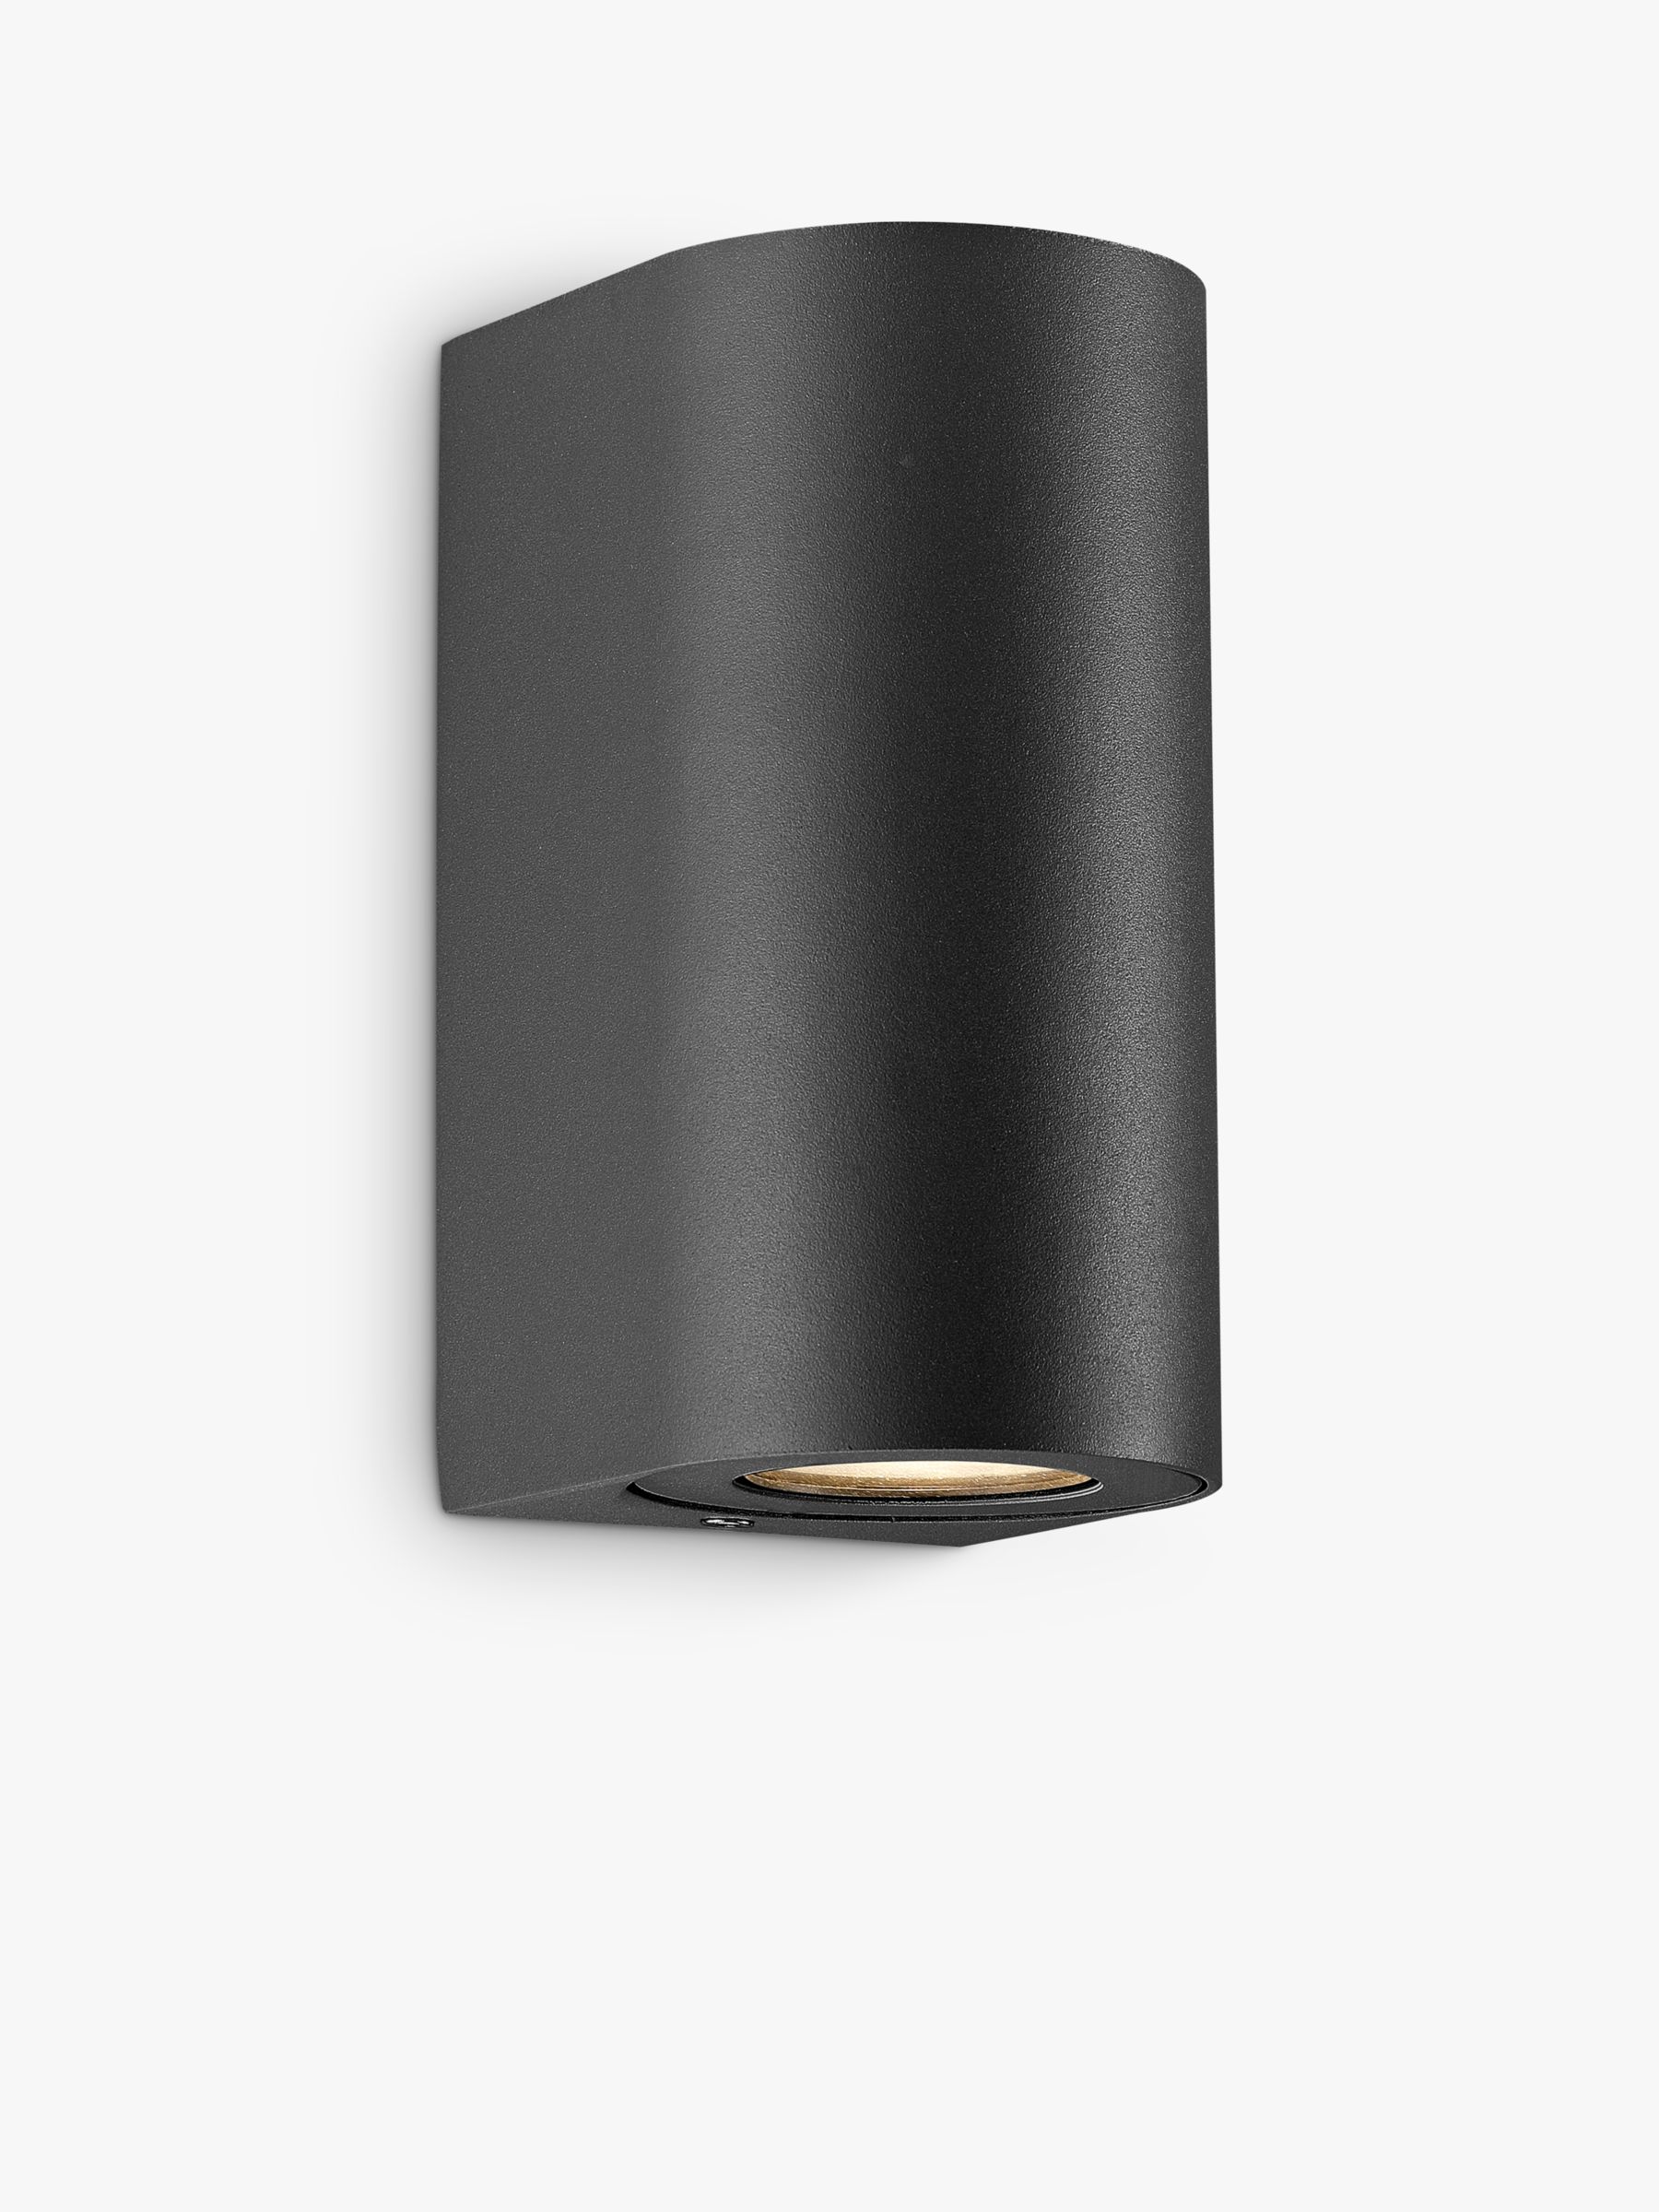 Photo of Nordlux canto max 2.0 indoor / outdoor wall light